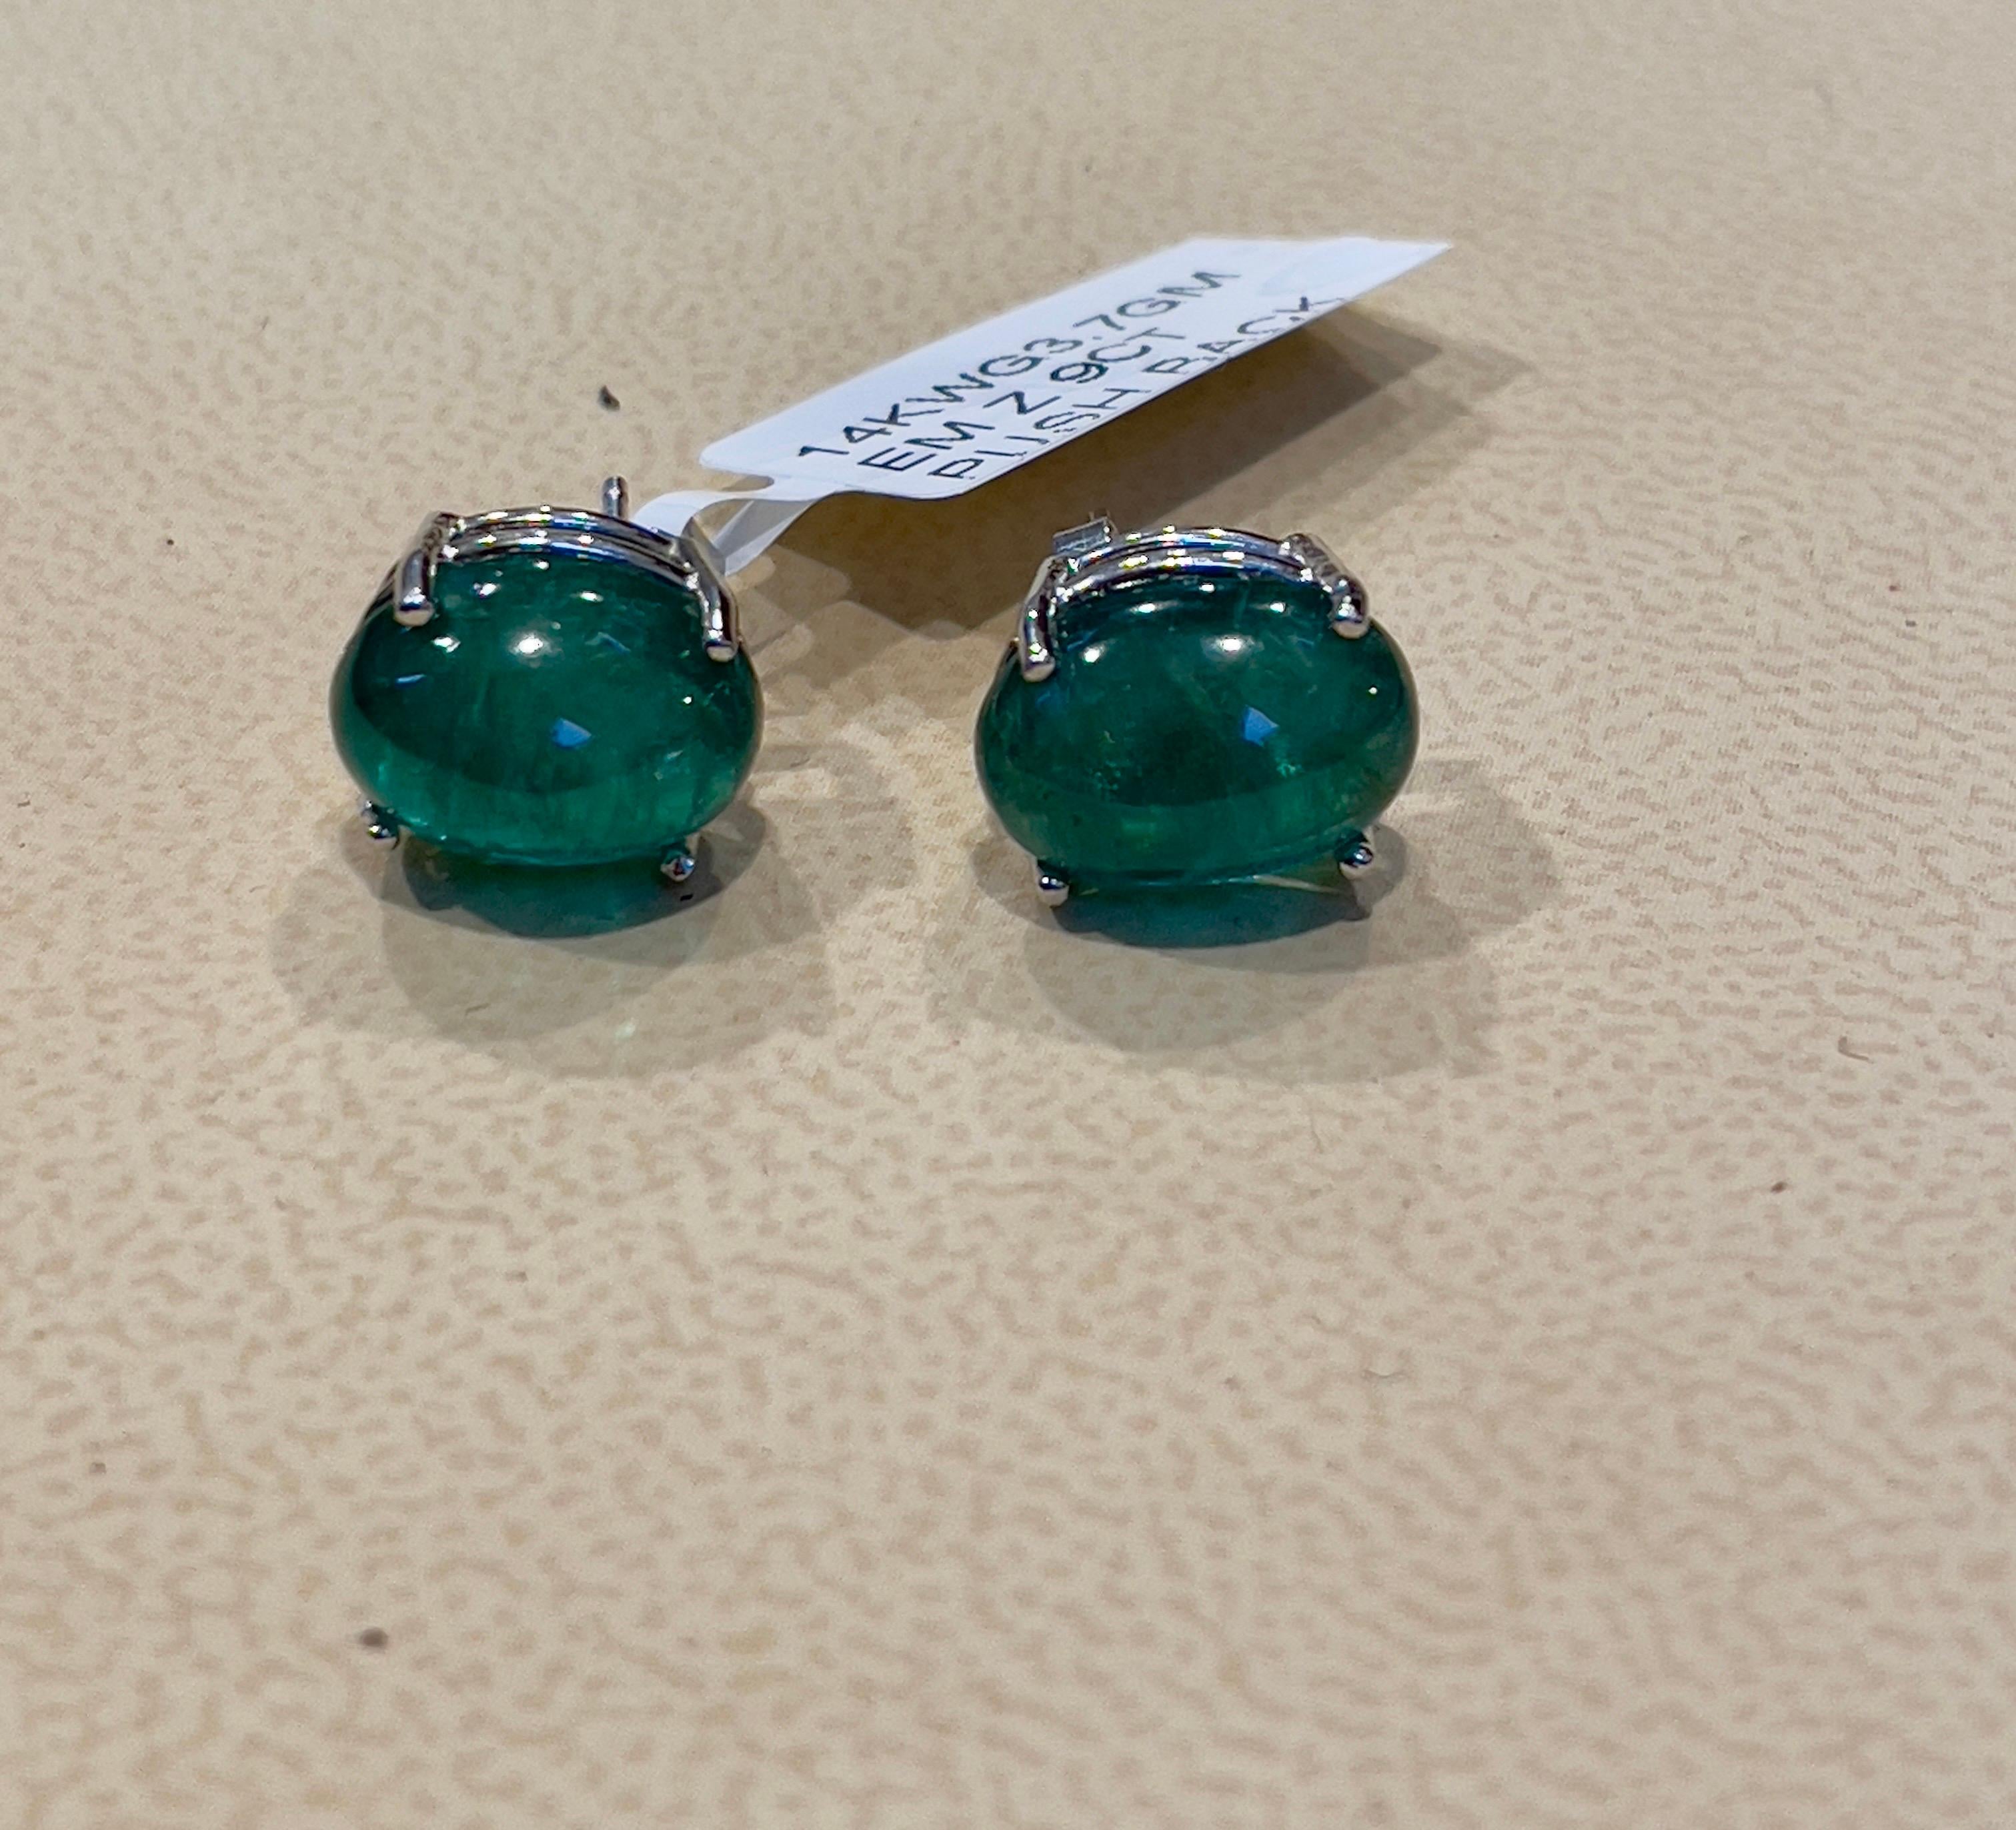 Approximately 9 Ct Natural Emerald Zambia Cabochon  Stud Earring 14 Karat White Gold Push Back
Natural stones , not enhanced
Each  Emerald is about 4.5 carat 
Very desirable color and quality. Nice color and clarity.
perfect matching pair made in 14